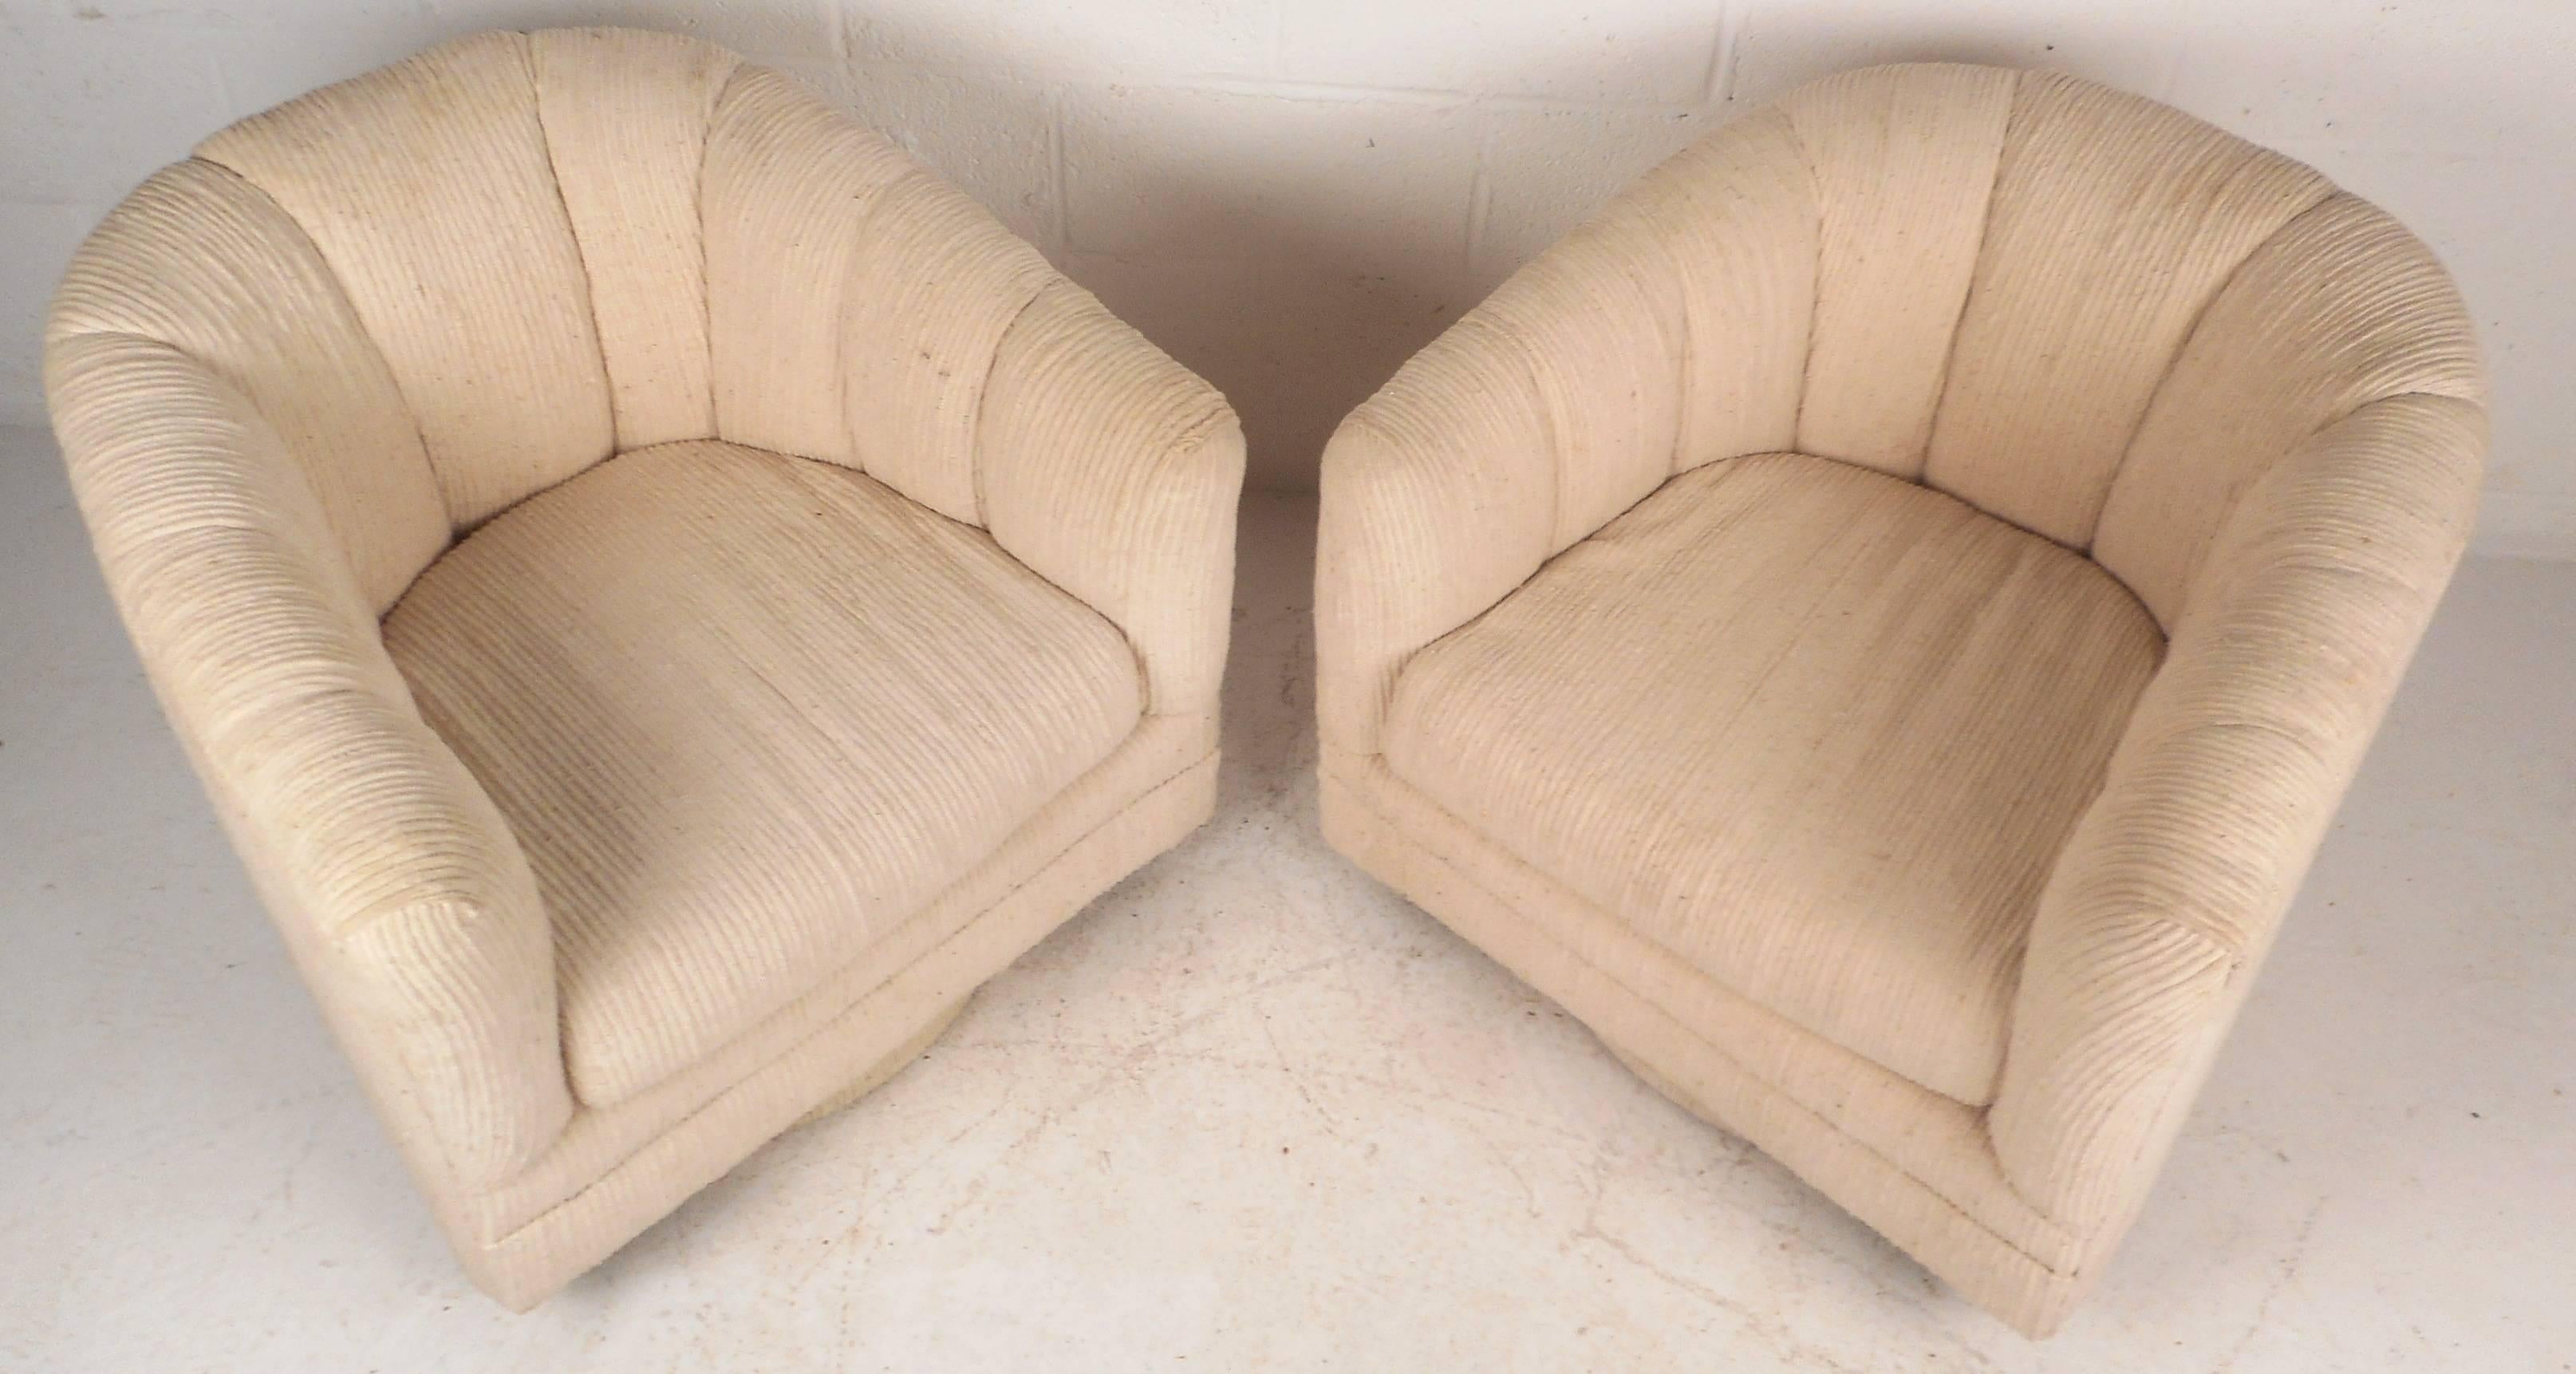 Beautiful pair of vintage modern lounge chairs with original plush cream colored upholstery. Unique design offers comfort and convenience in one stylish lounge chair with the ability to swivel. Thick padded cushions and barrel back rests make this